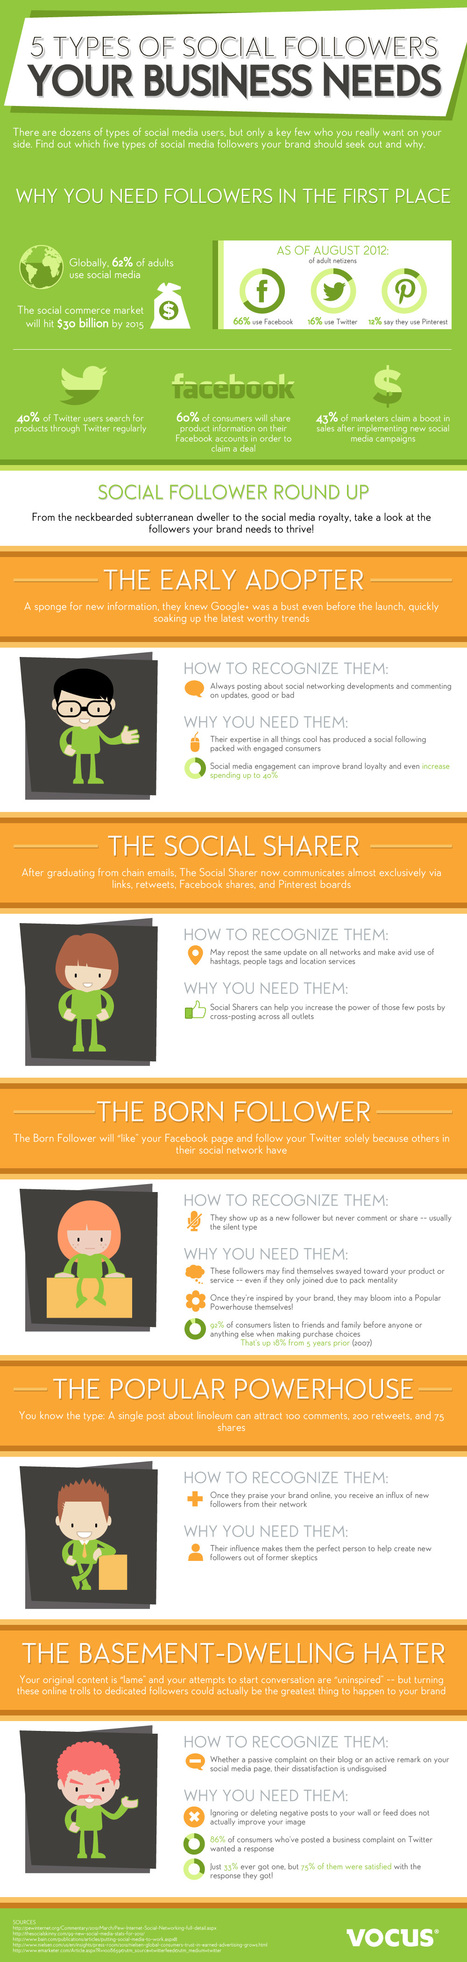 The 5 Types of Social Followers that Every Business Needs [INFOGRAPHIC] | MarketingHits | Scoop.it